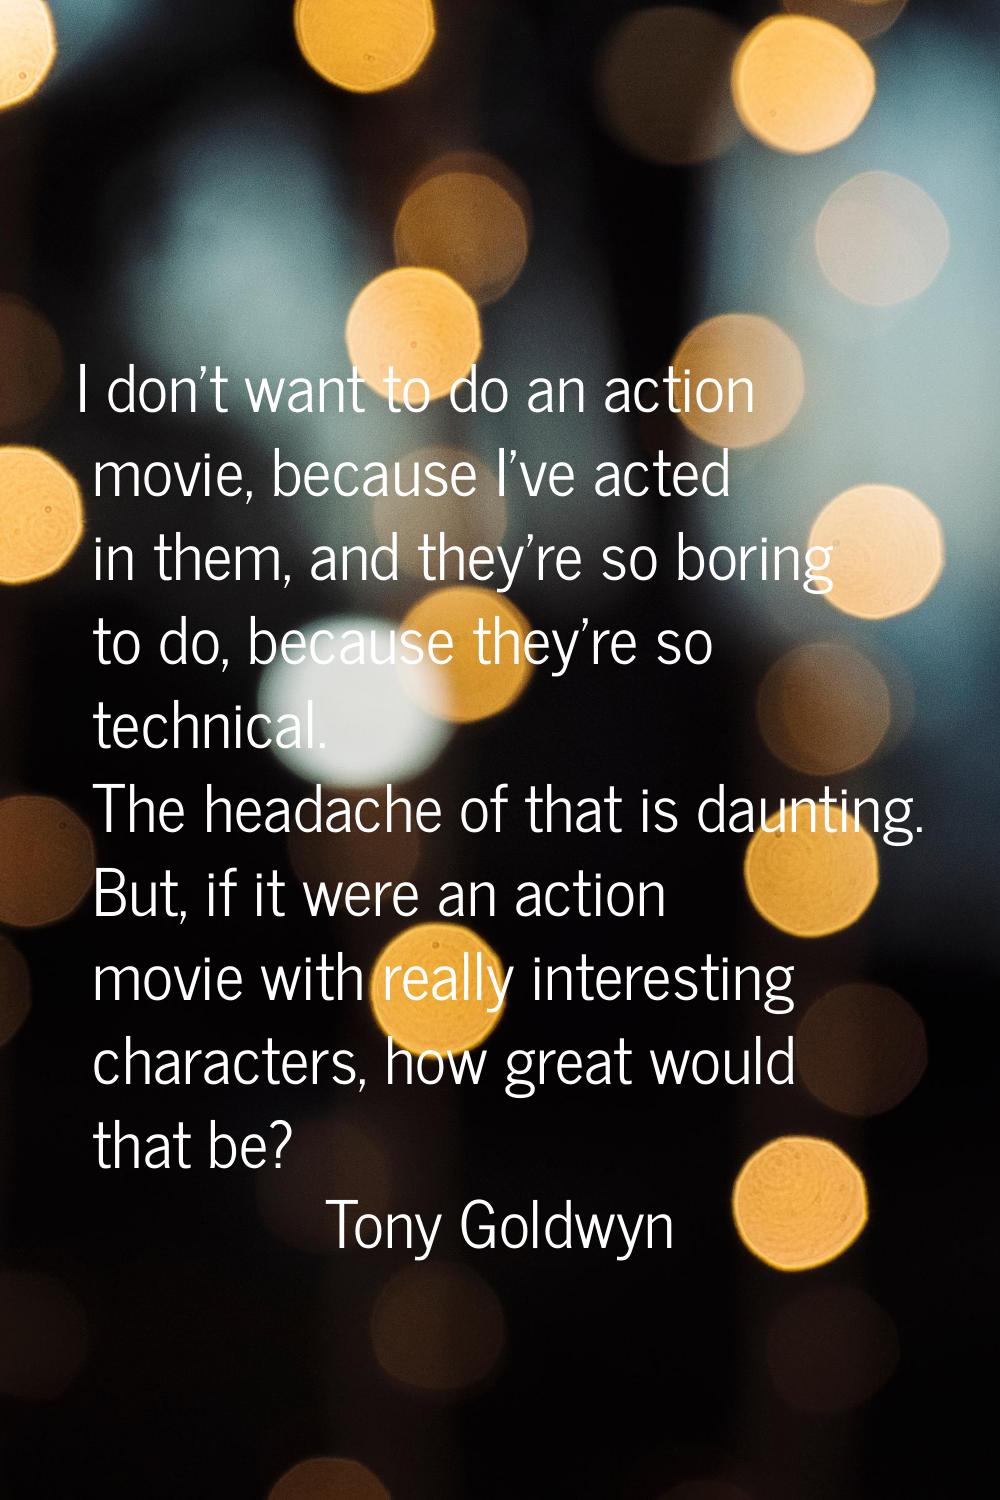 I don't want to do an action movie, because I've acted in them, and they're so boring to do, becaus